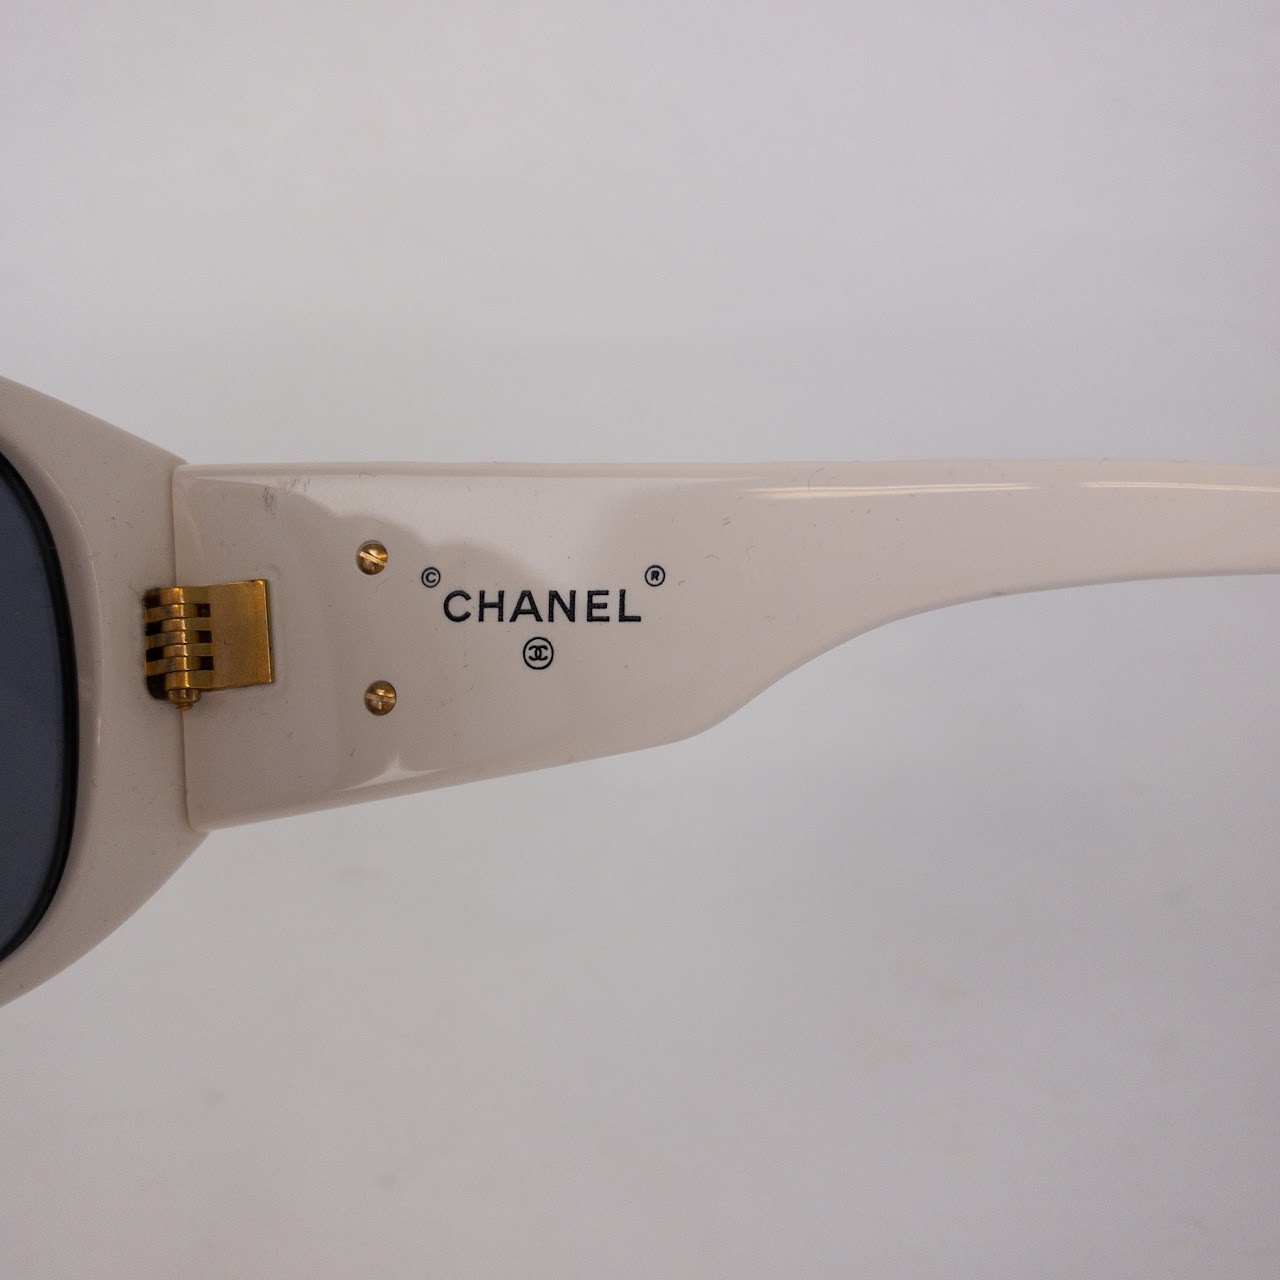 Chanel 'Quilted' Sunglasses